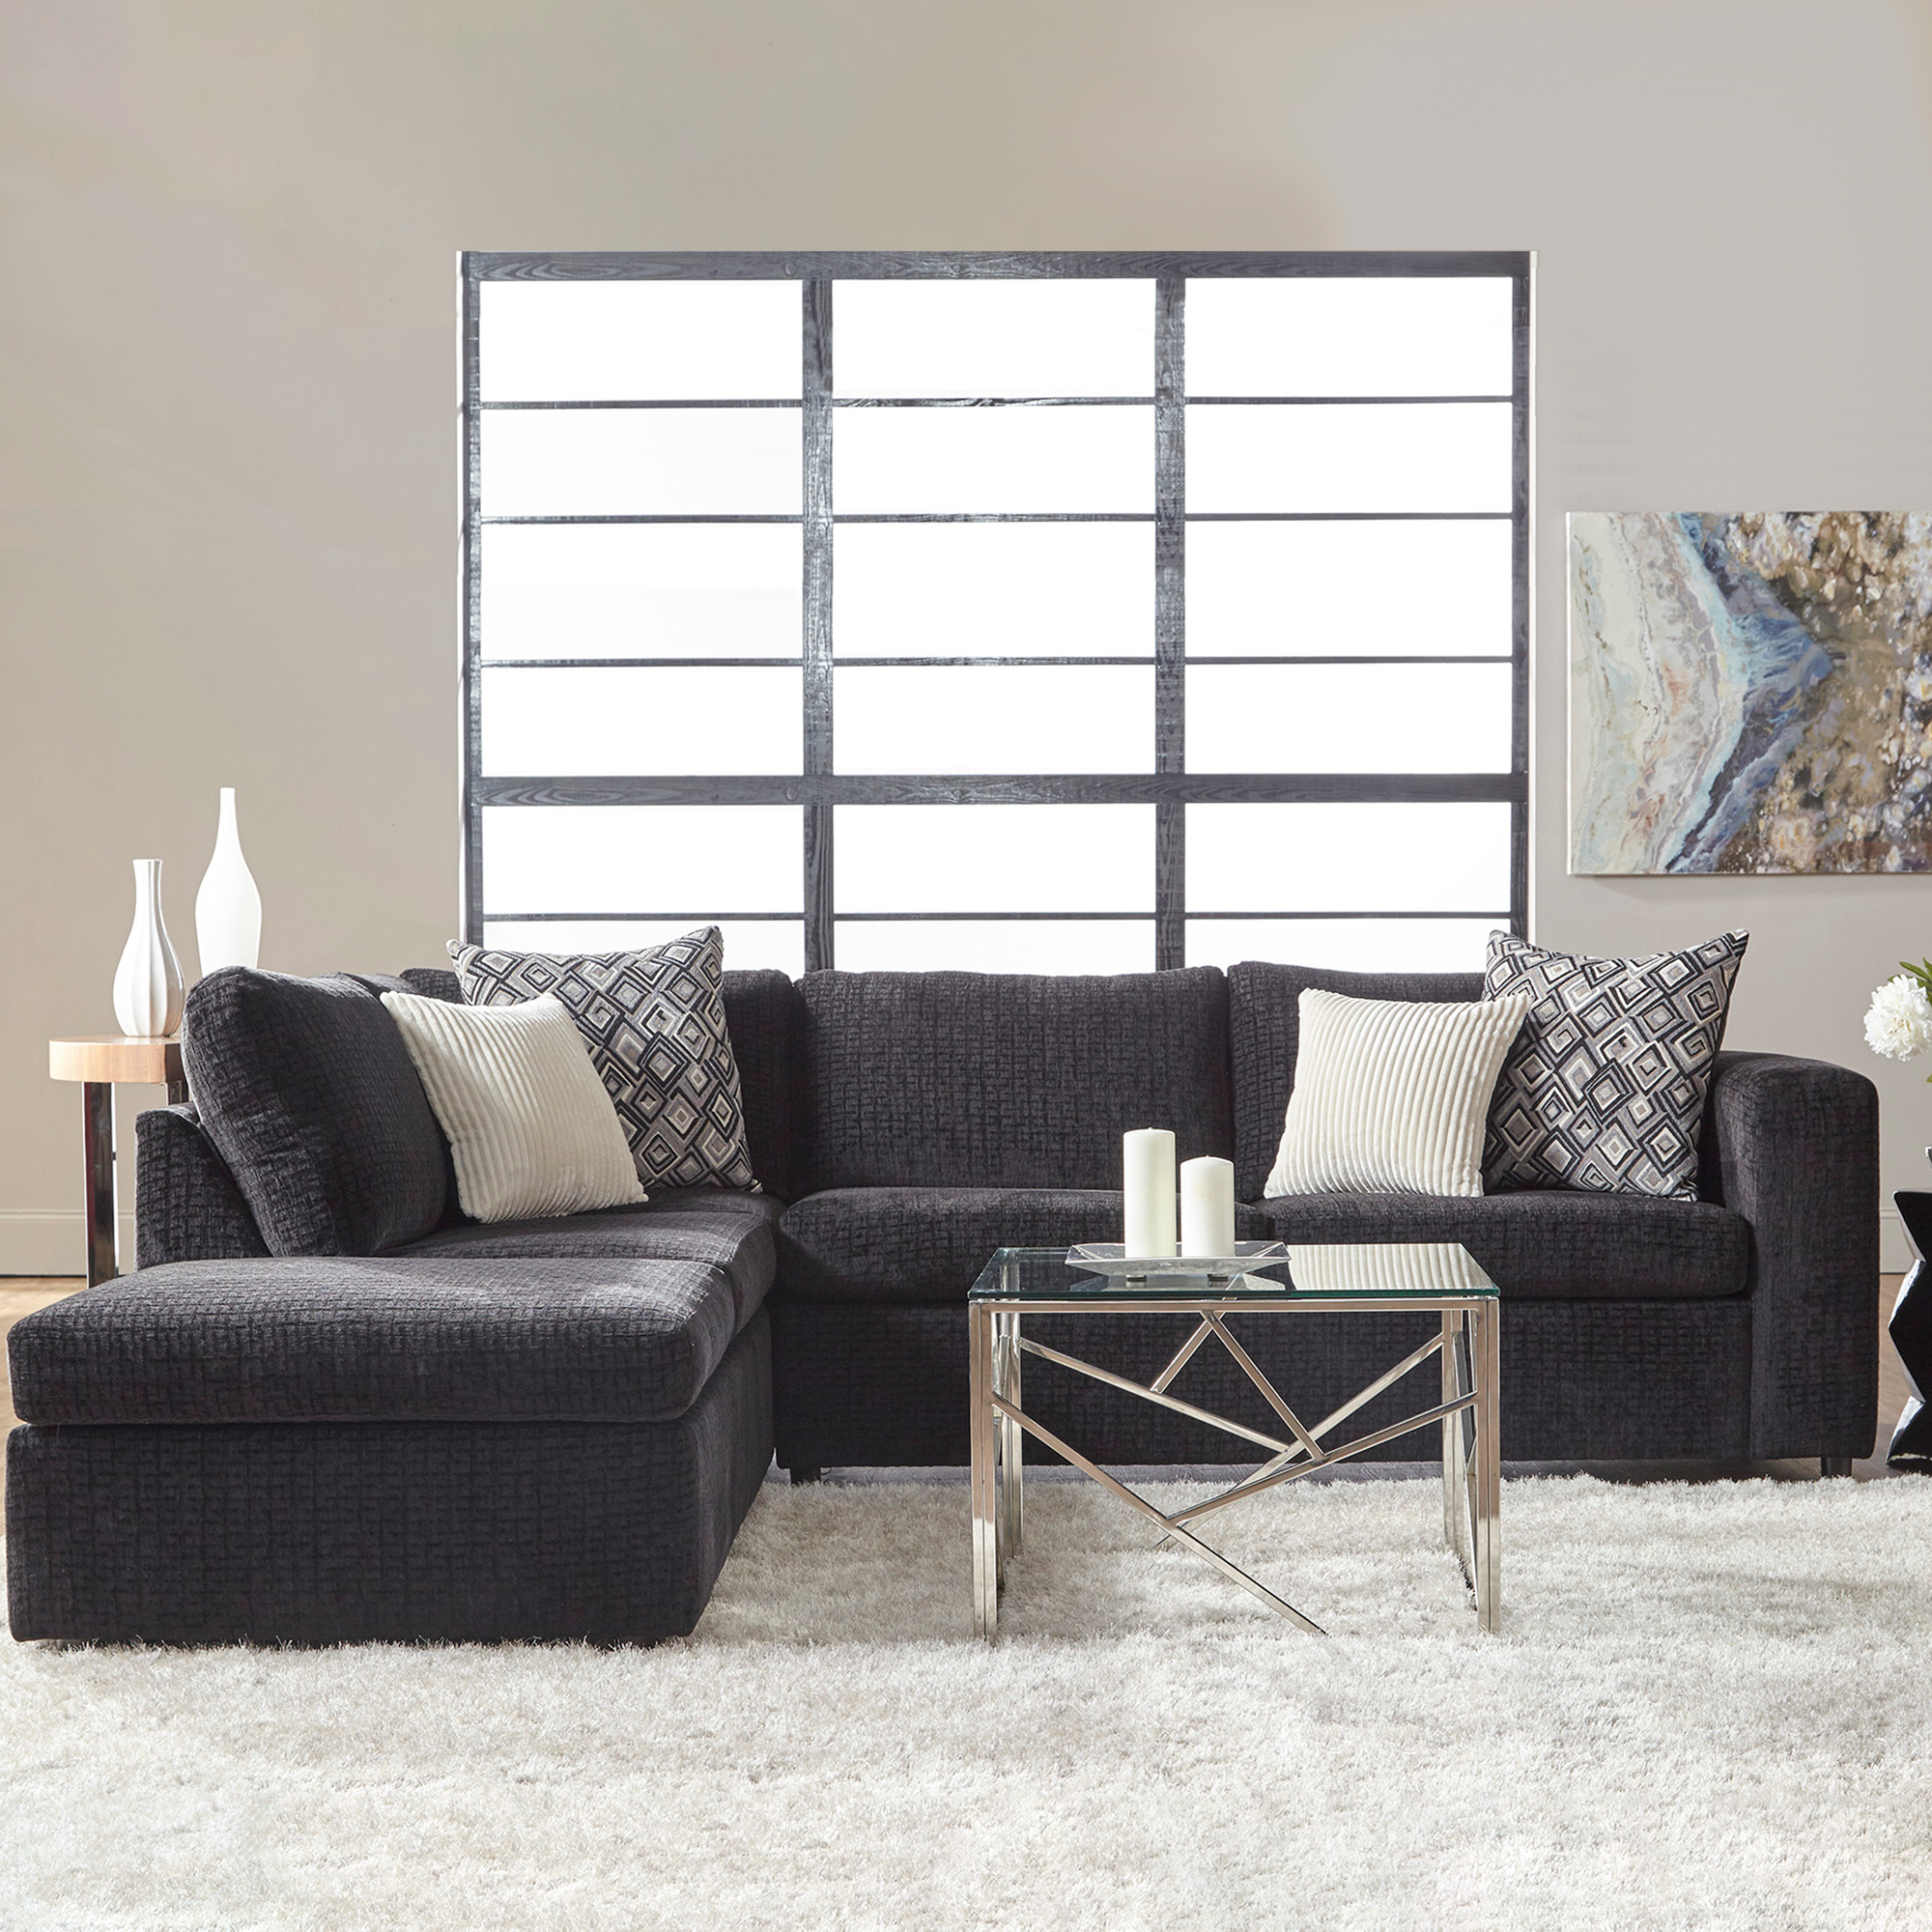 hammersmith sectional tan lifstyle.png__PID:5163bc29-ad70-4fd1-88a4-cbea45b6302f